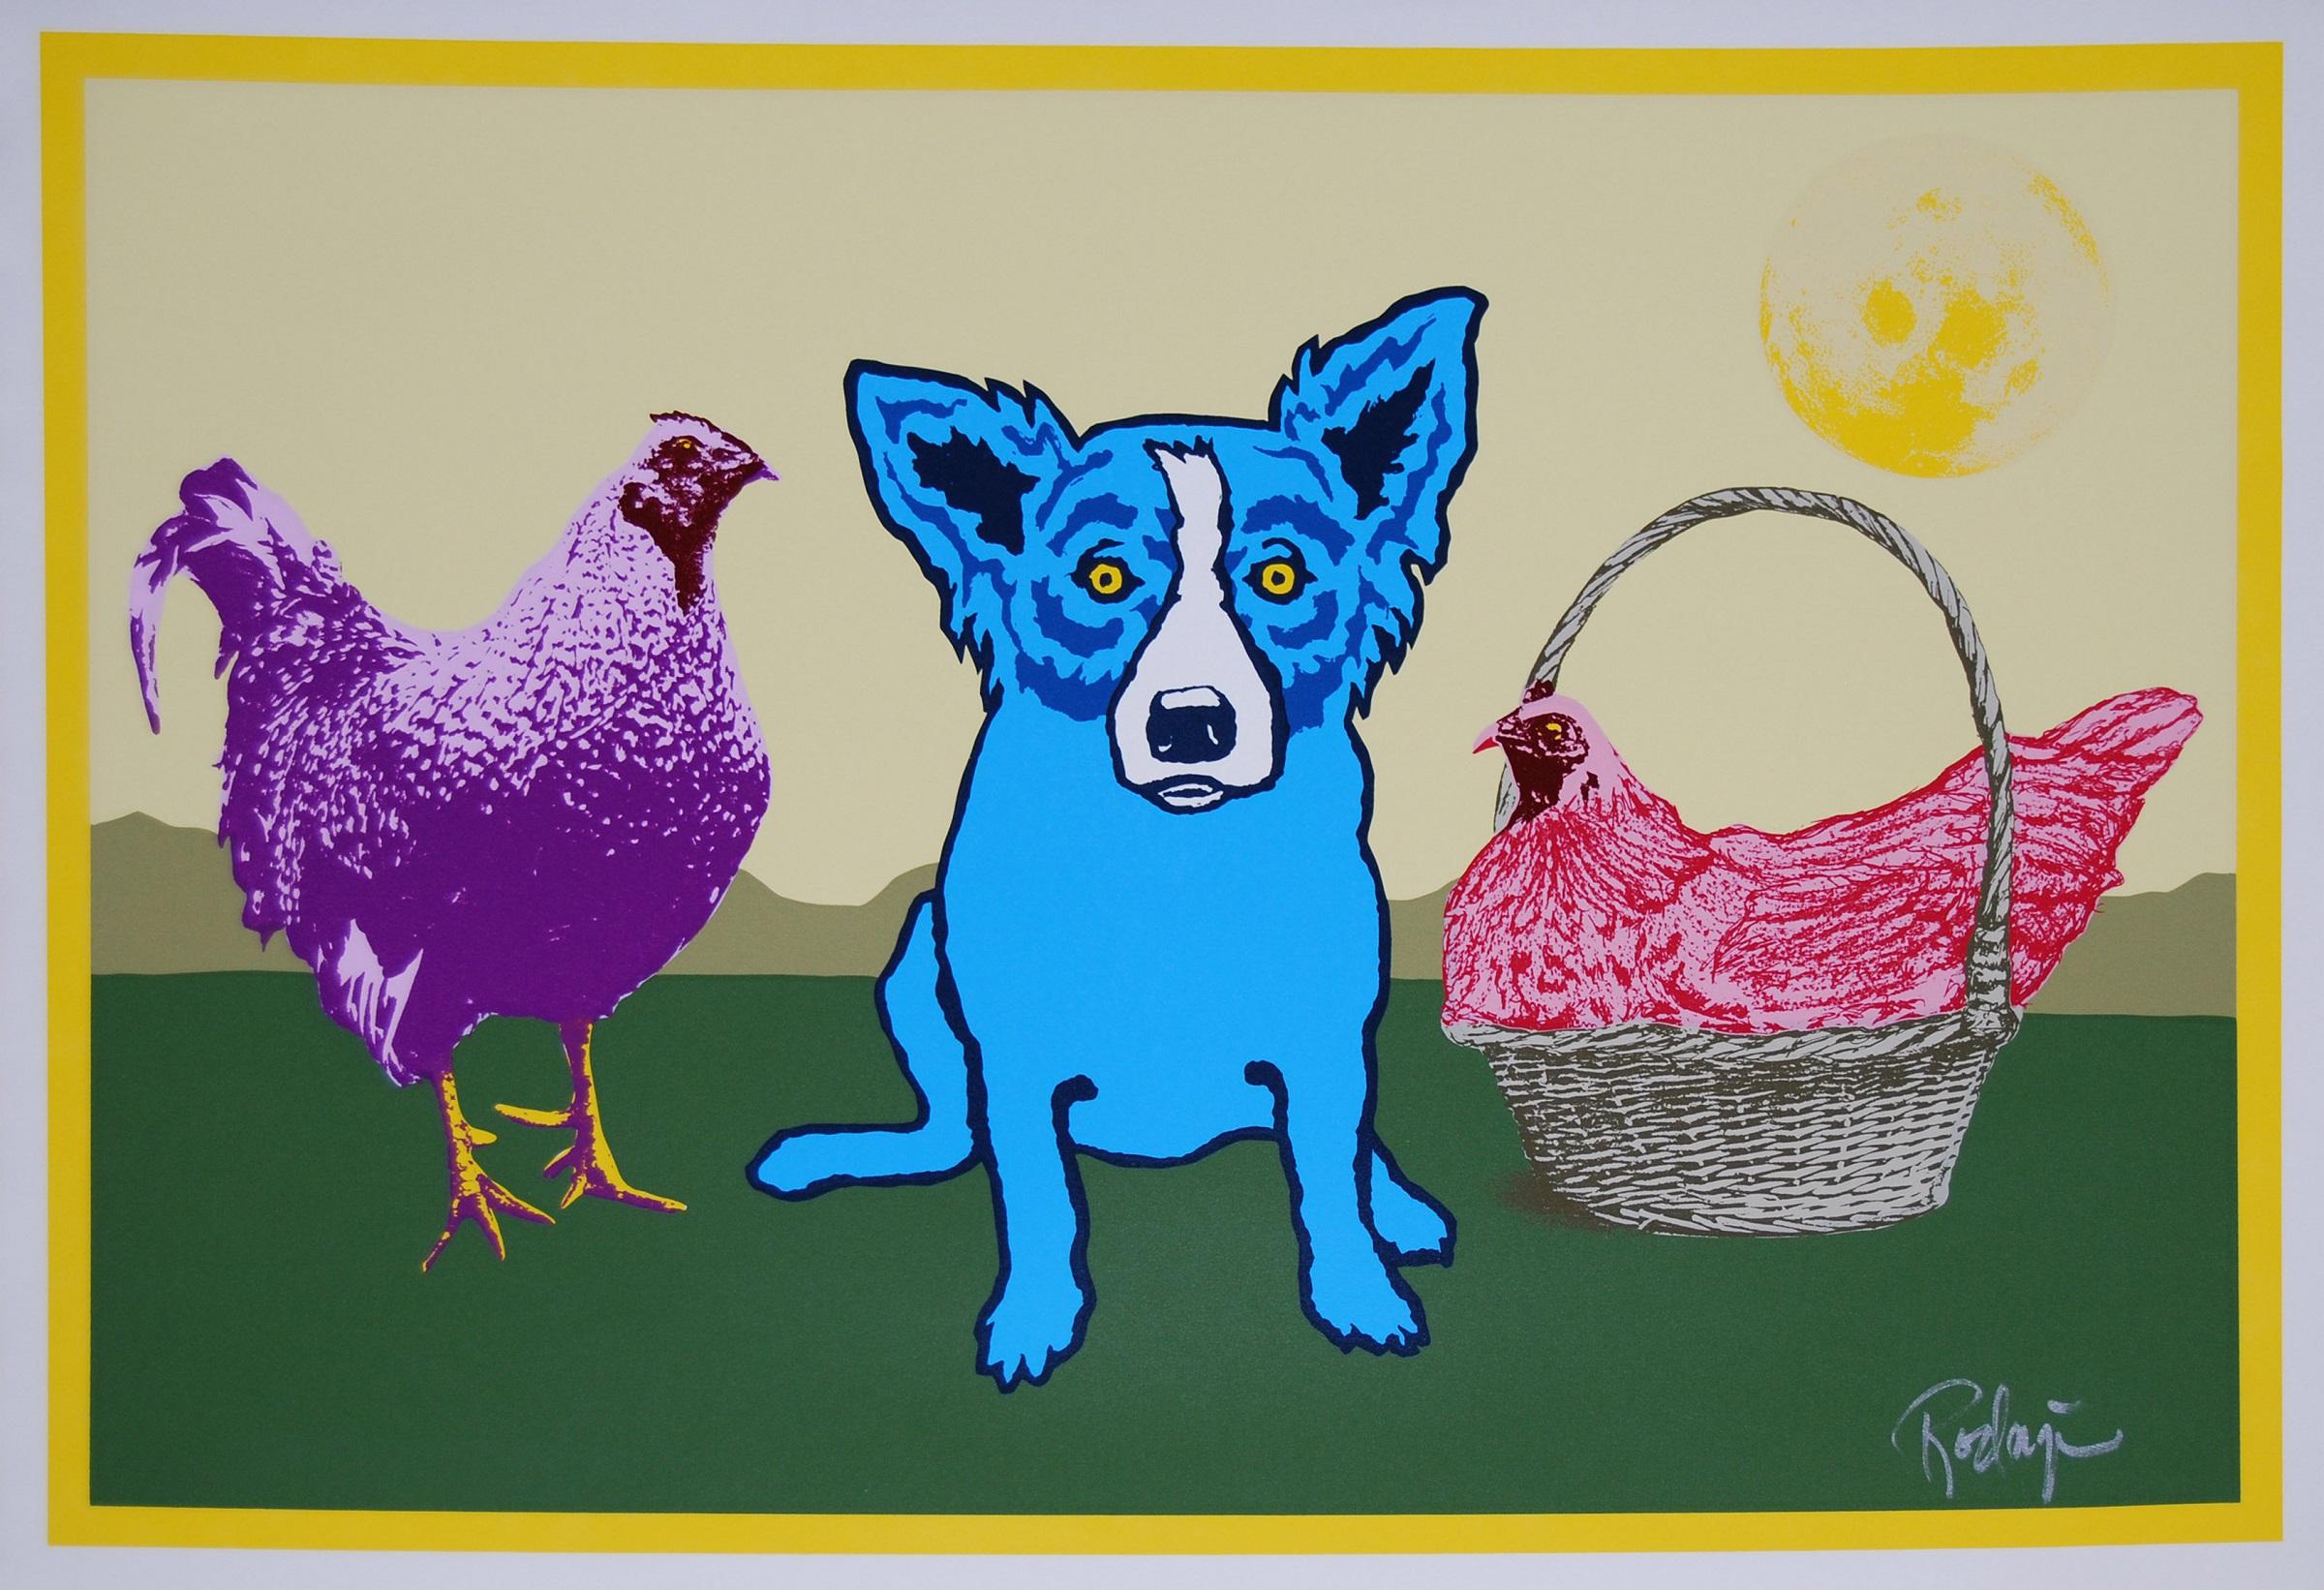 George Rodrigue Animal Print - Chicken In A Basket Yellow Moon - Signed Silkscreen Blue Dog Print Edition of 10